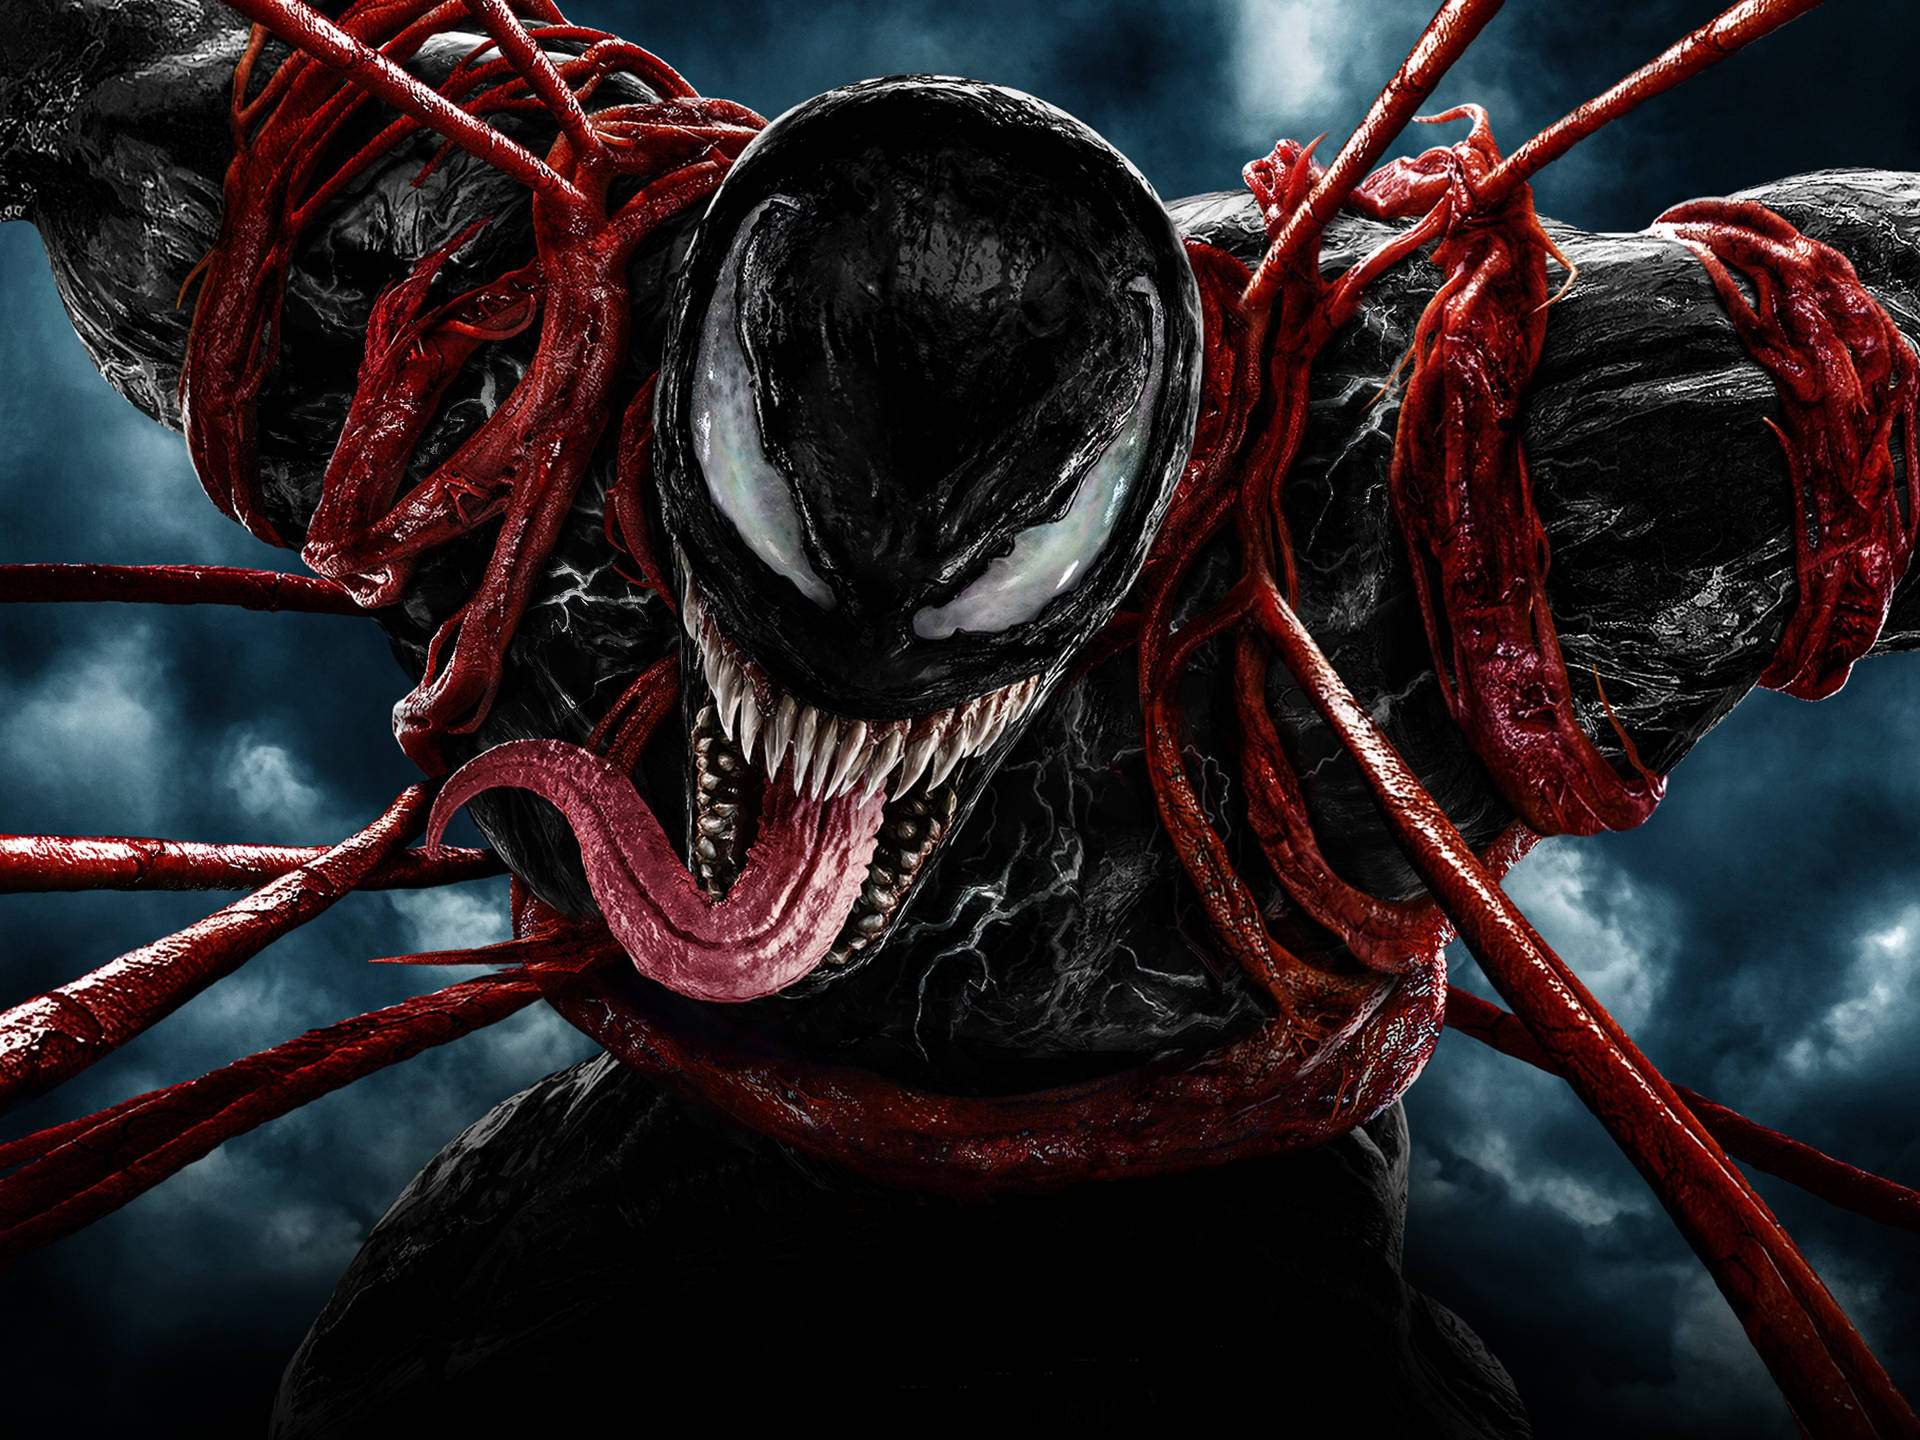 Venom Engulfed In Carnage's Arms In Full 4k Ultra Hd